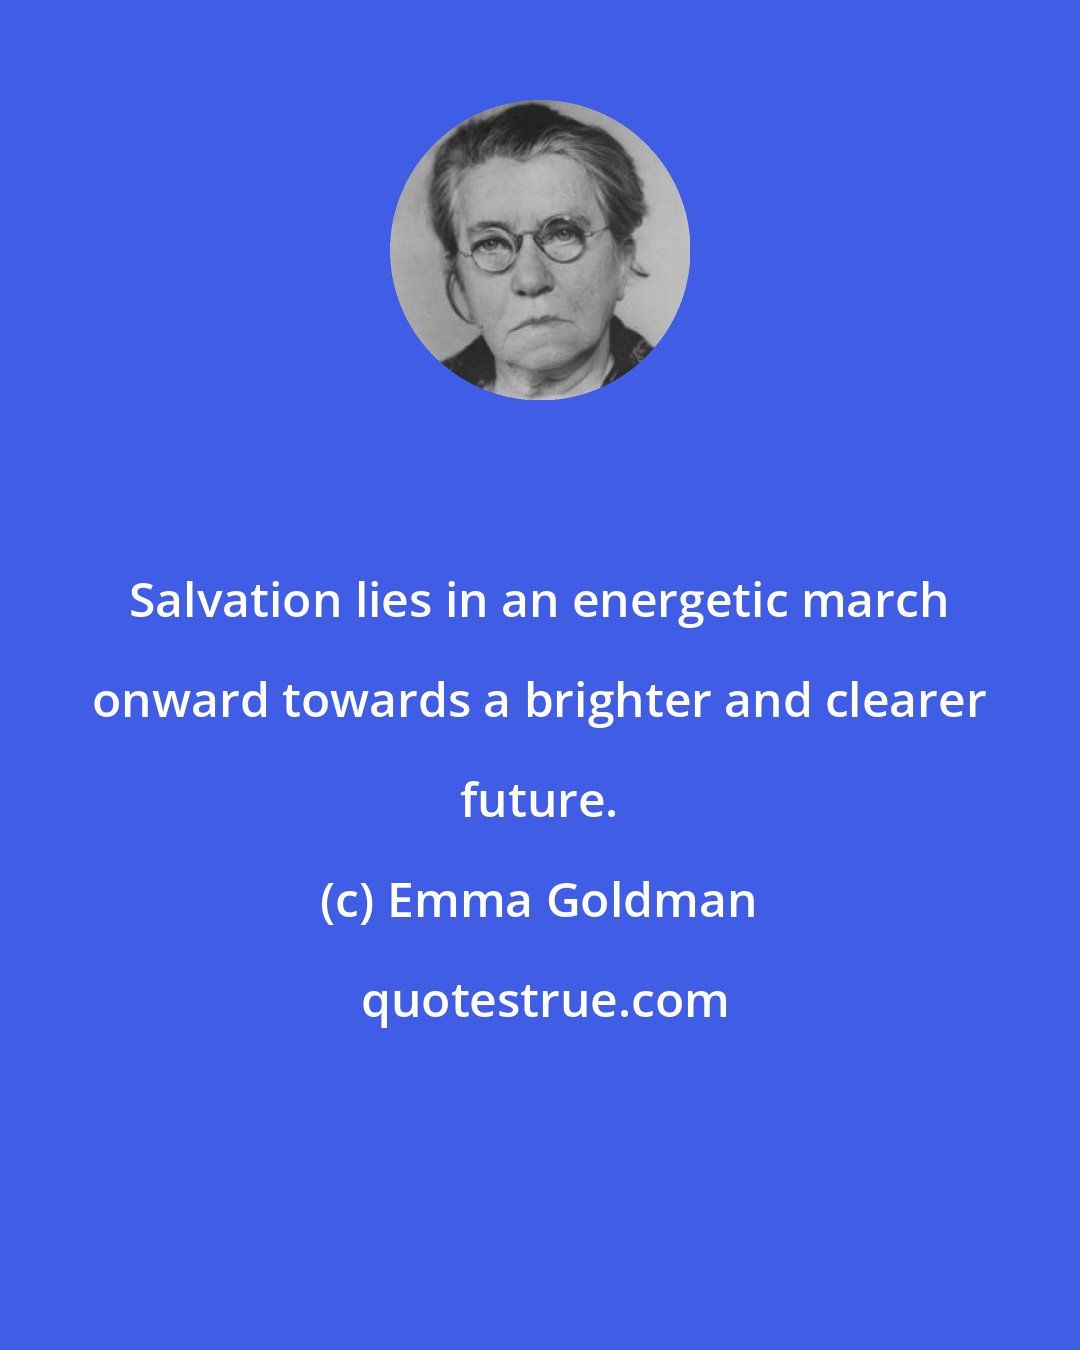 Emma Goldman: Salvation lies in an energetic march onward towards a brighter and clearer future.